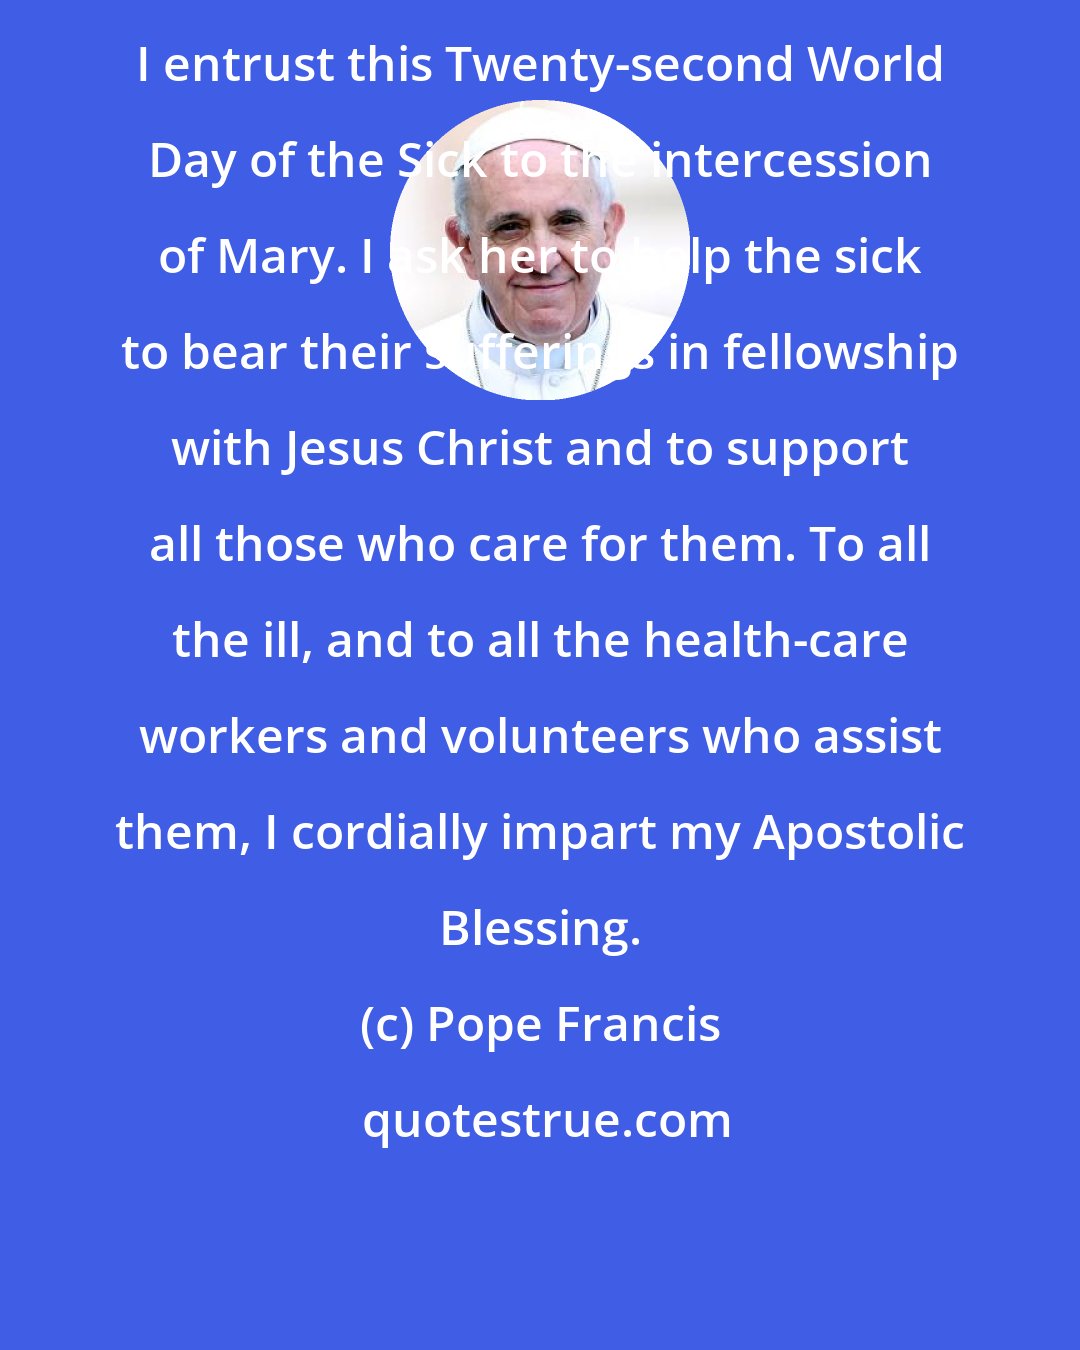 Pope Francis: I entrust this Twenty-second World Day of the Sick to the intercession of Mary. I ask her to help the sick to bear their sufferings in fellowship with Jesus Christ and to support all those who care for them. To all the ill, and to all the health-care workers and volunteers who assist them, I cordially impart my Apostolic Blessing.